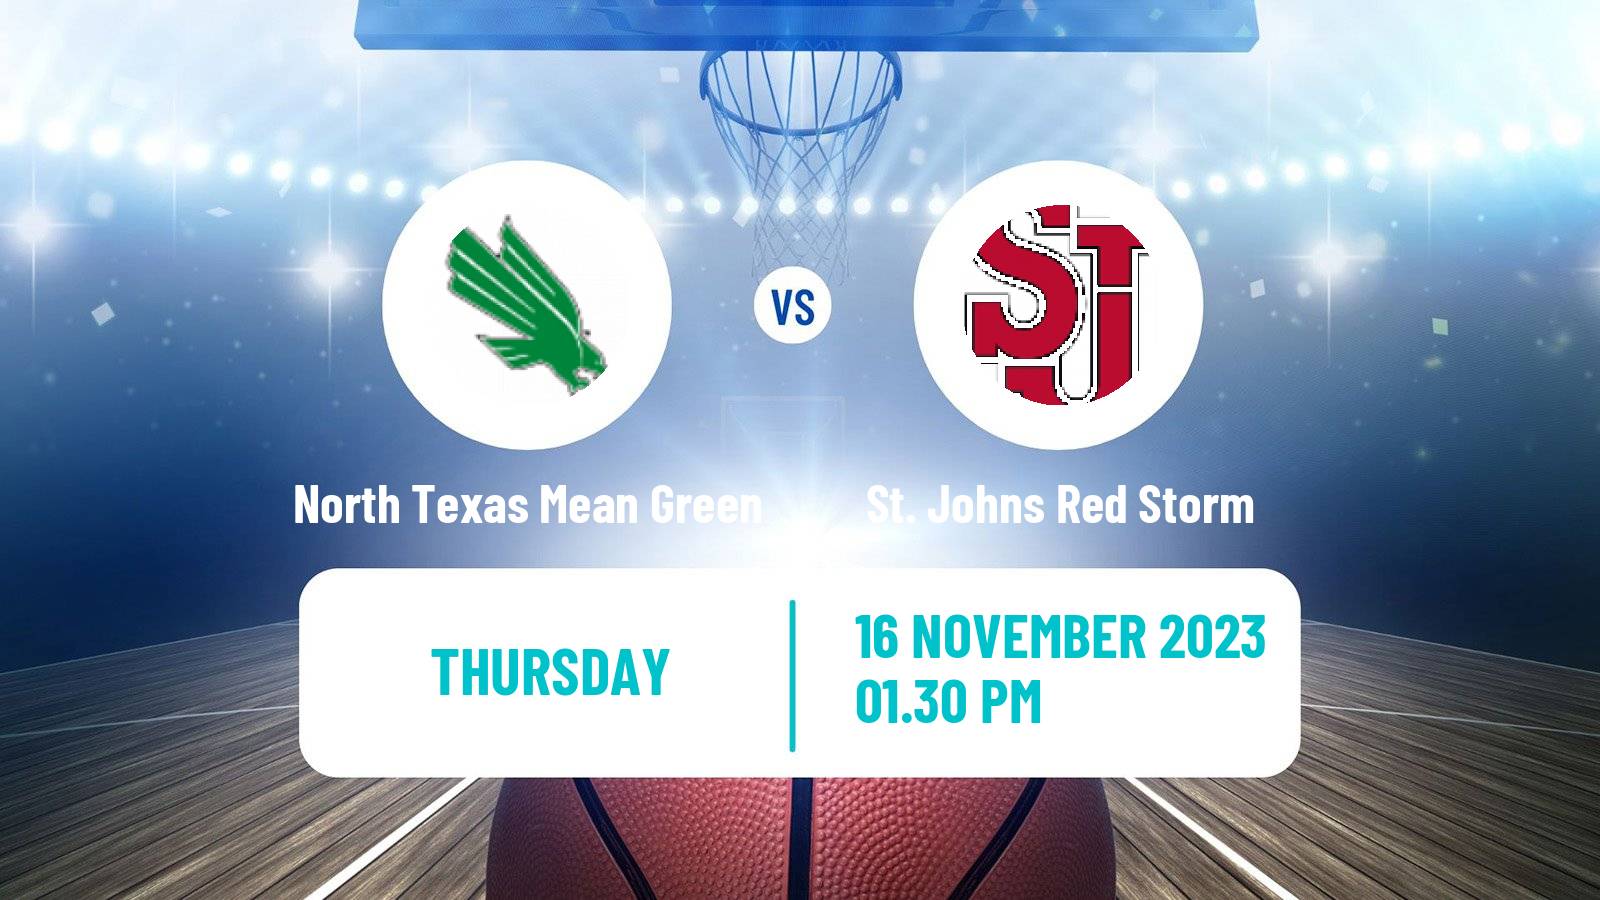 Basketball NCAA College Basketball North Texas Mean Green - St. Johns Red Storm